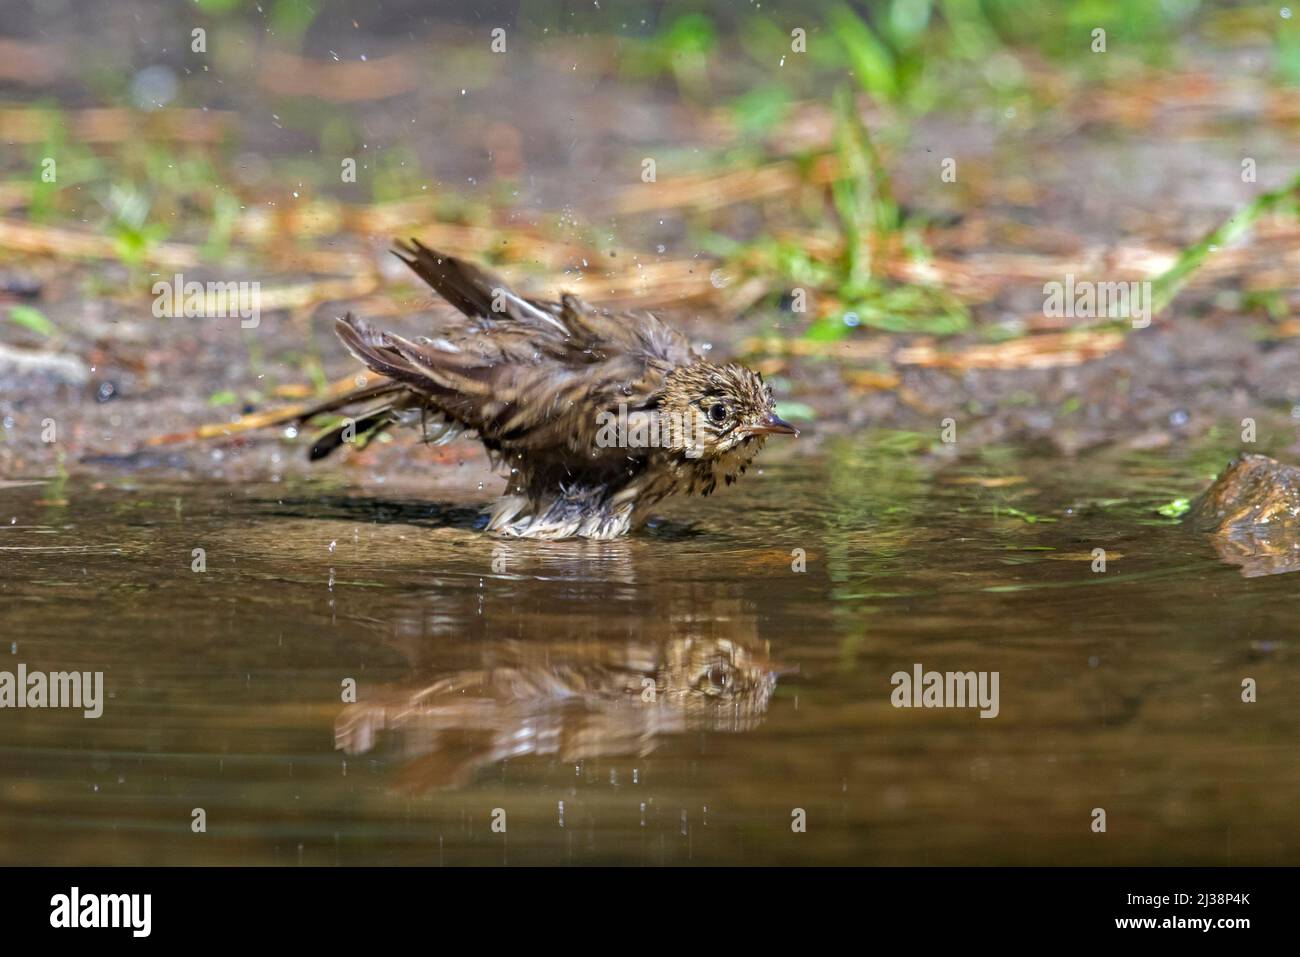 Tree pipit (Anthus trivialis) bathing in water from pond / rivulet Stock Photo